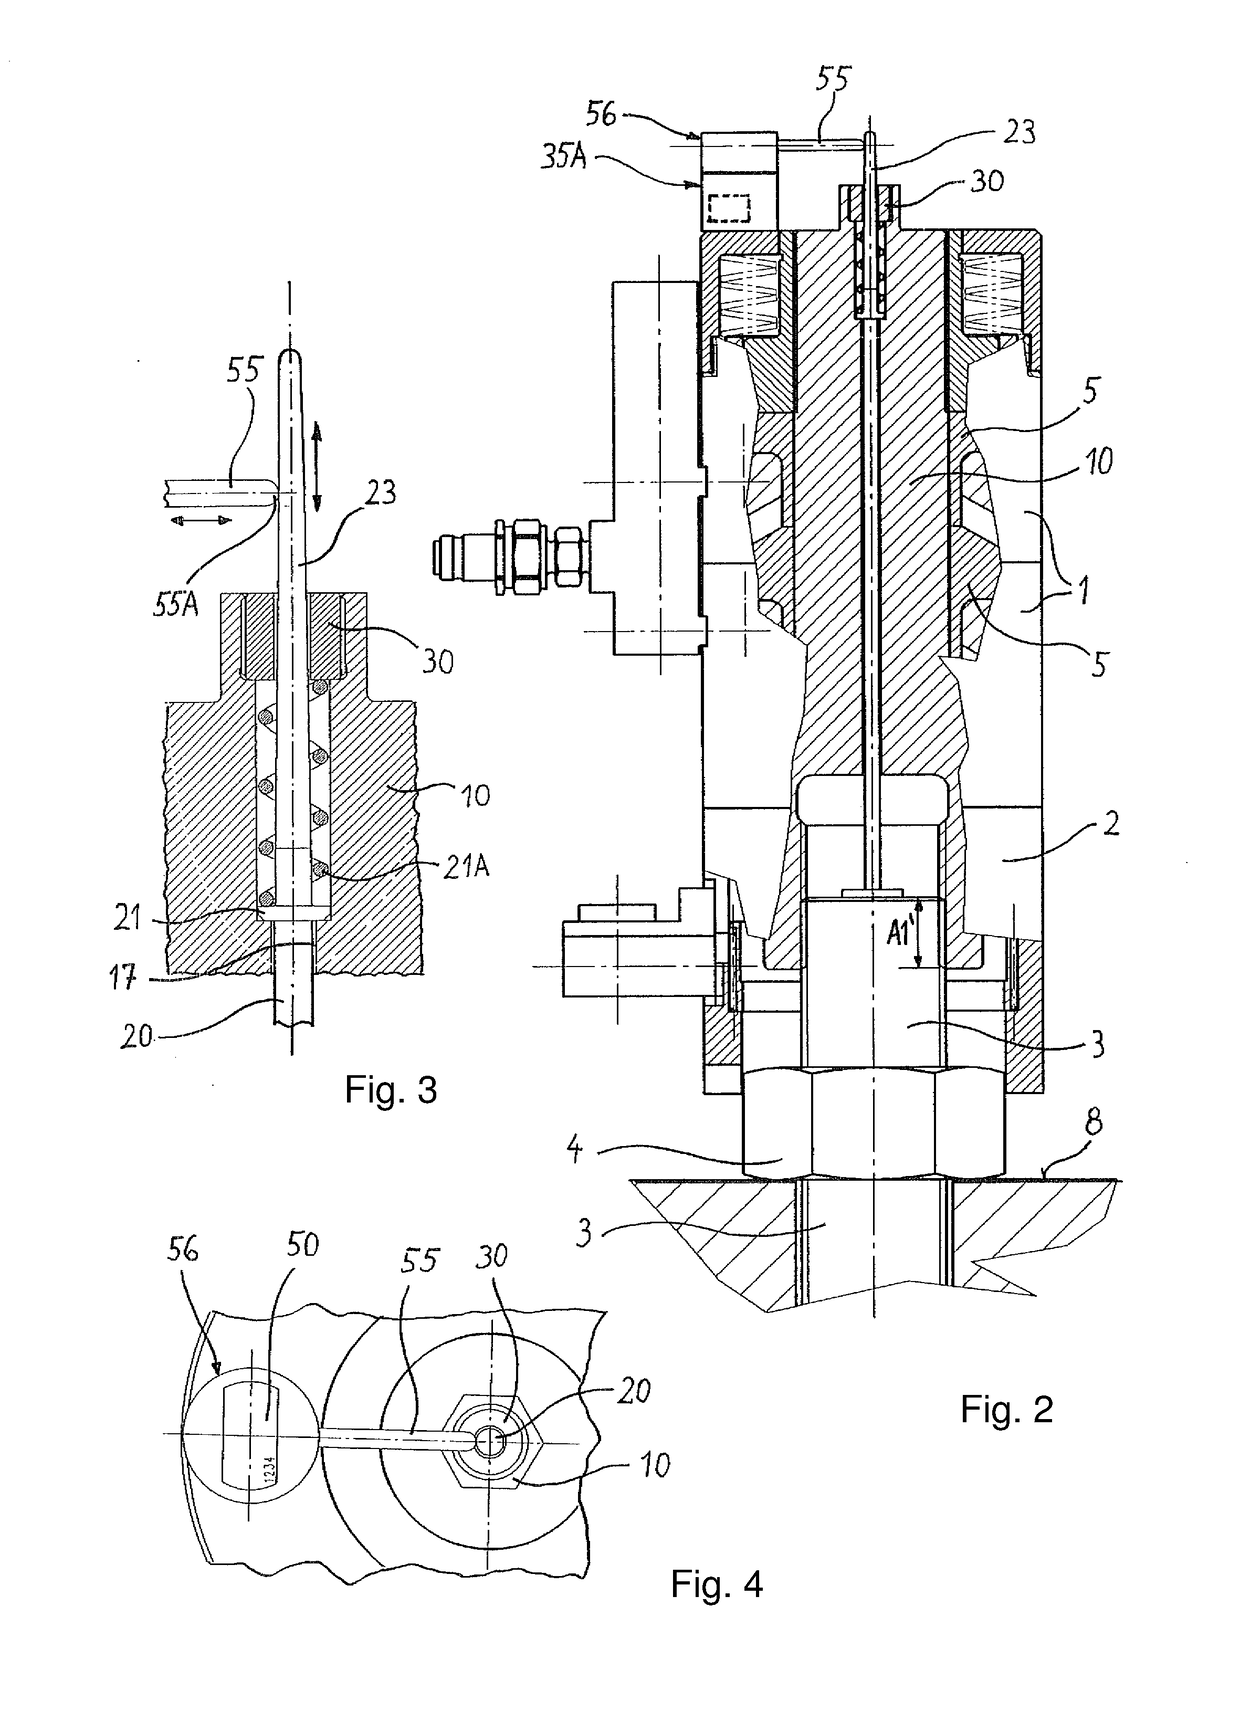 Tensioning Device for Extending a Threaded Bolt